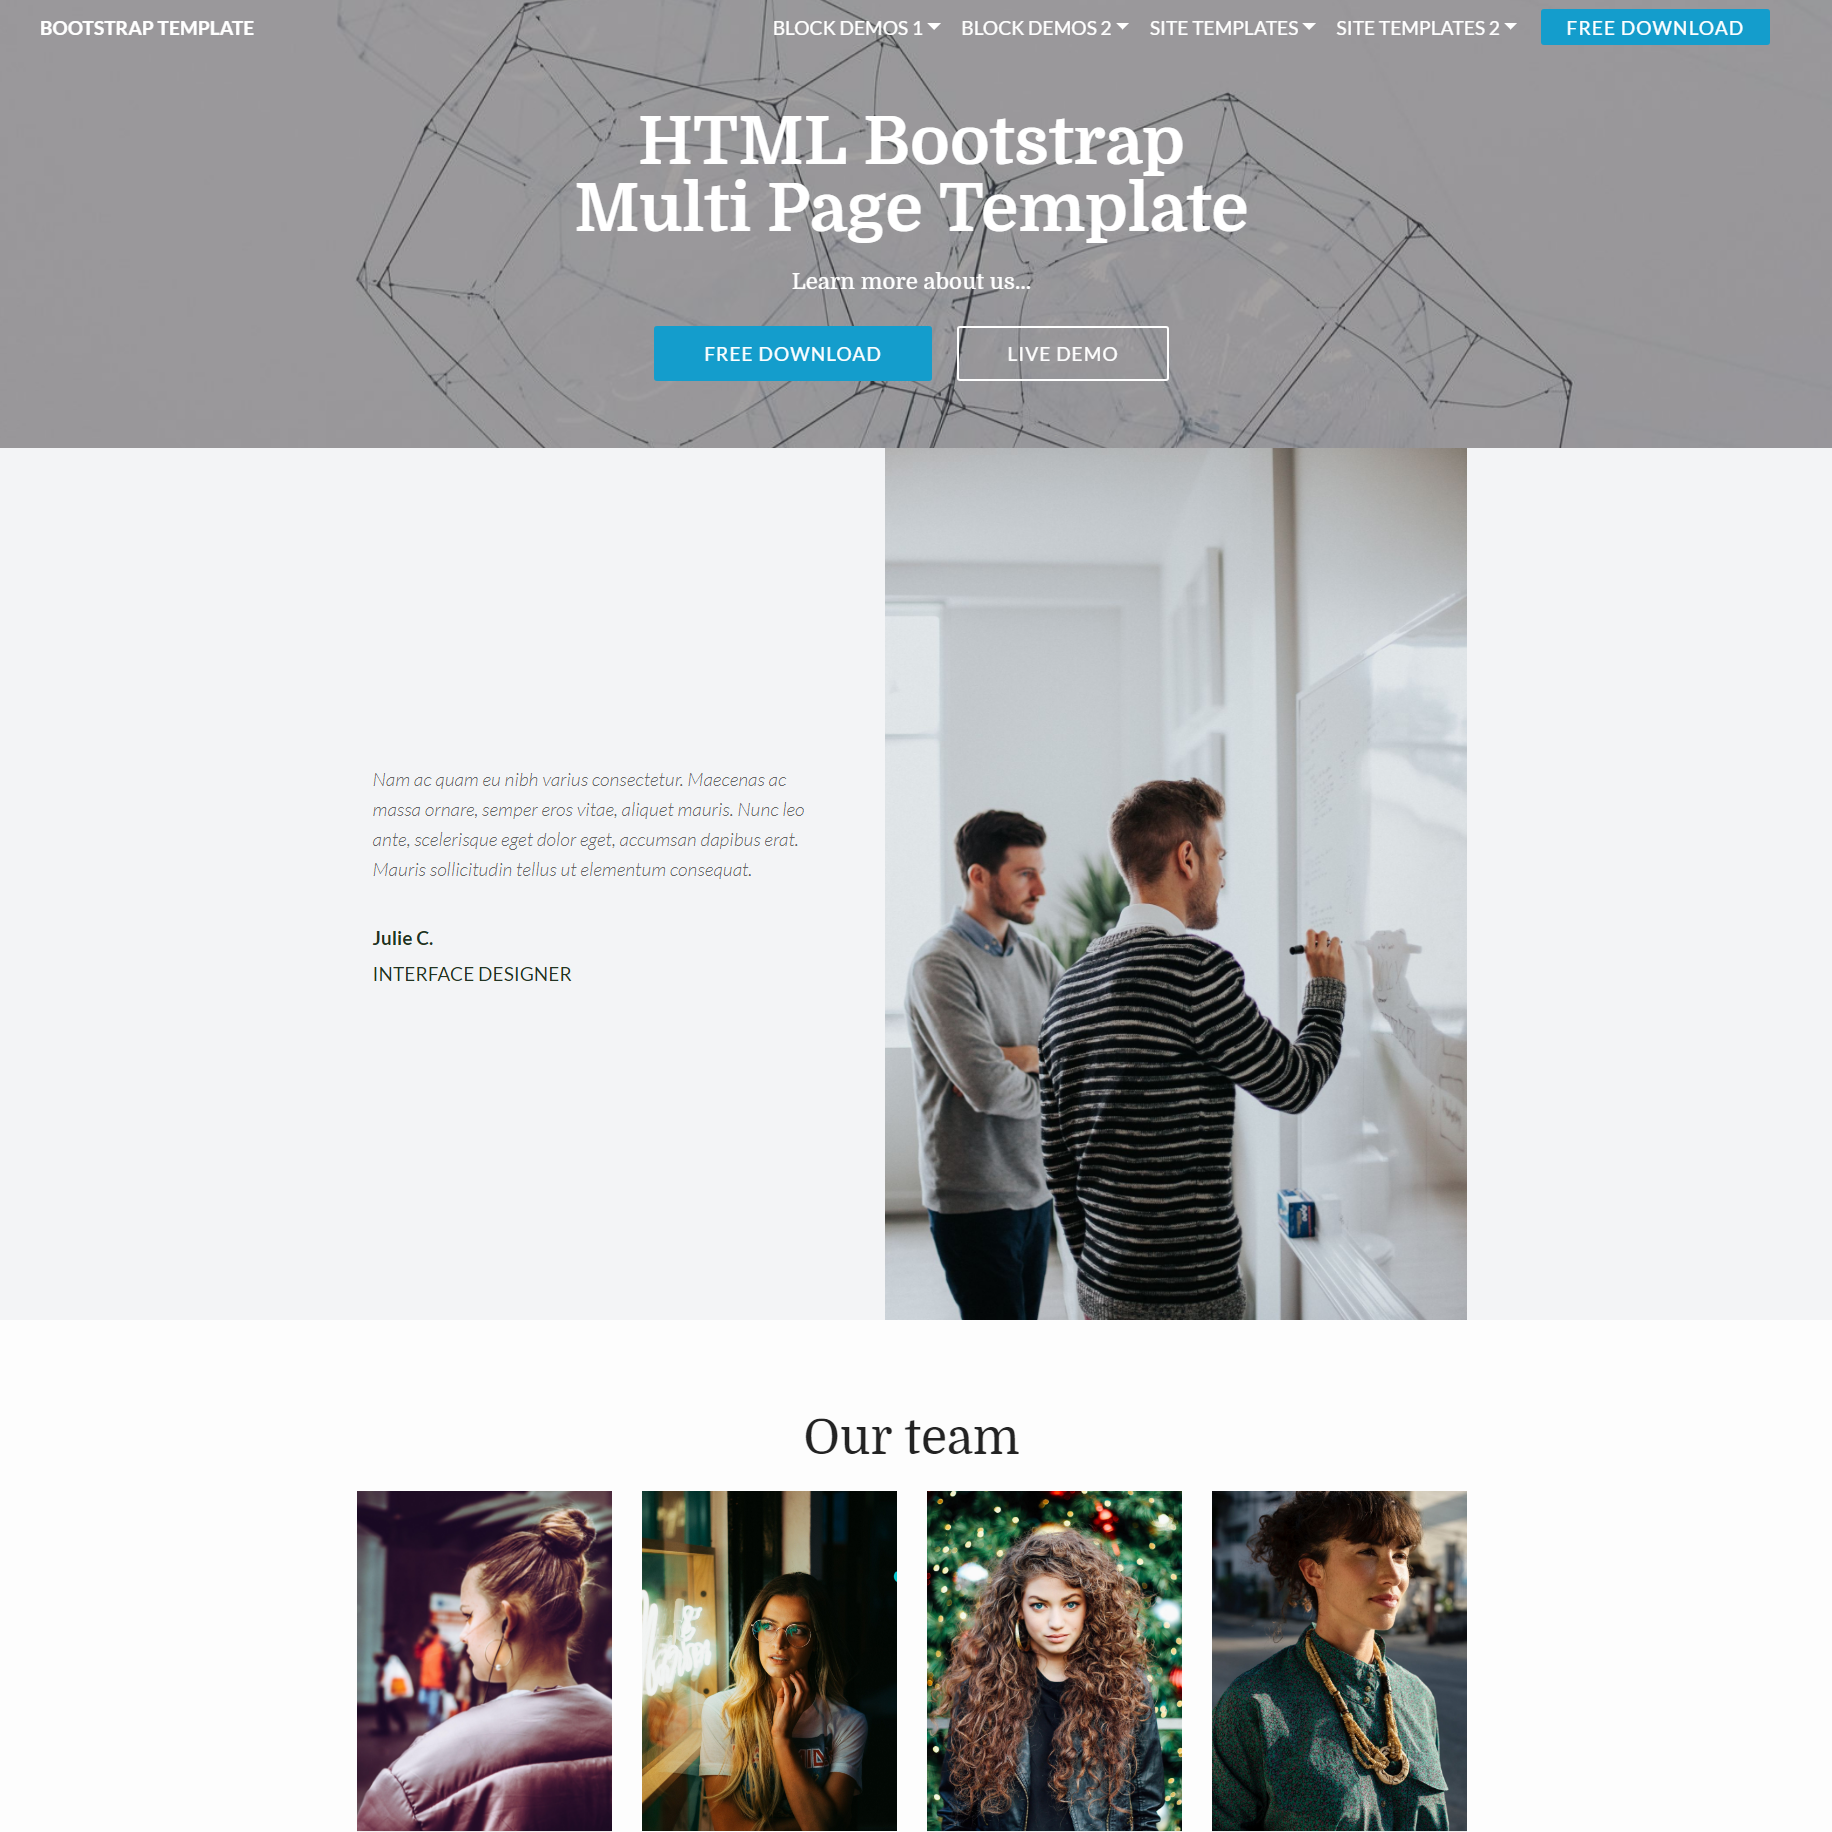 Responsive Bootstrap Multi page Templates